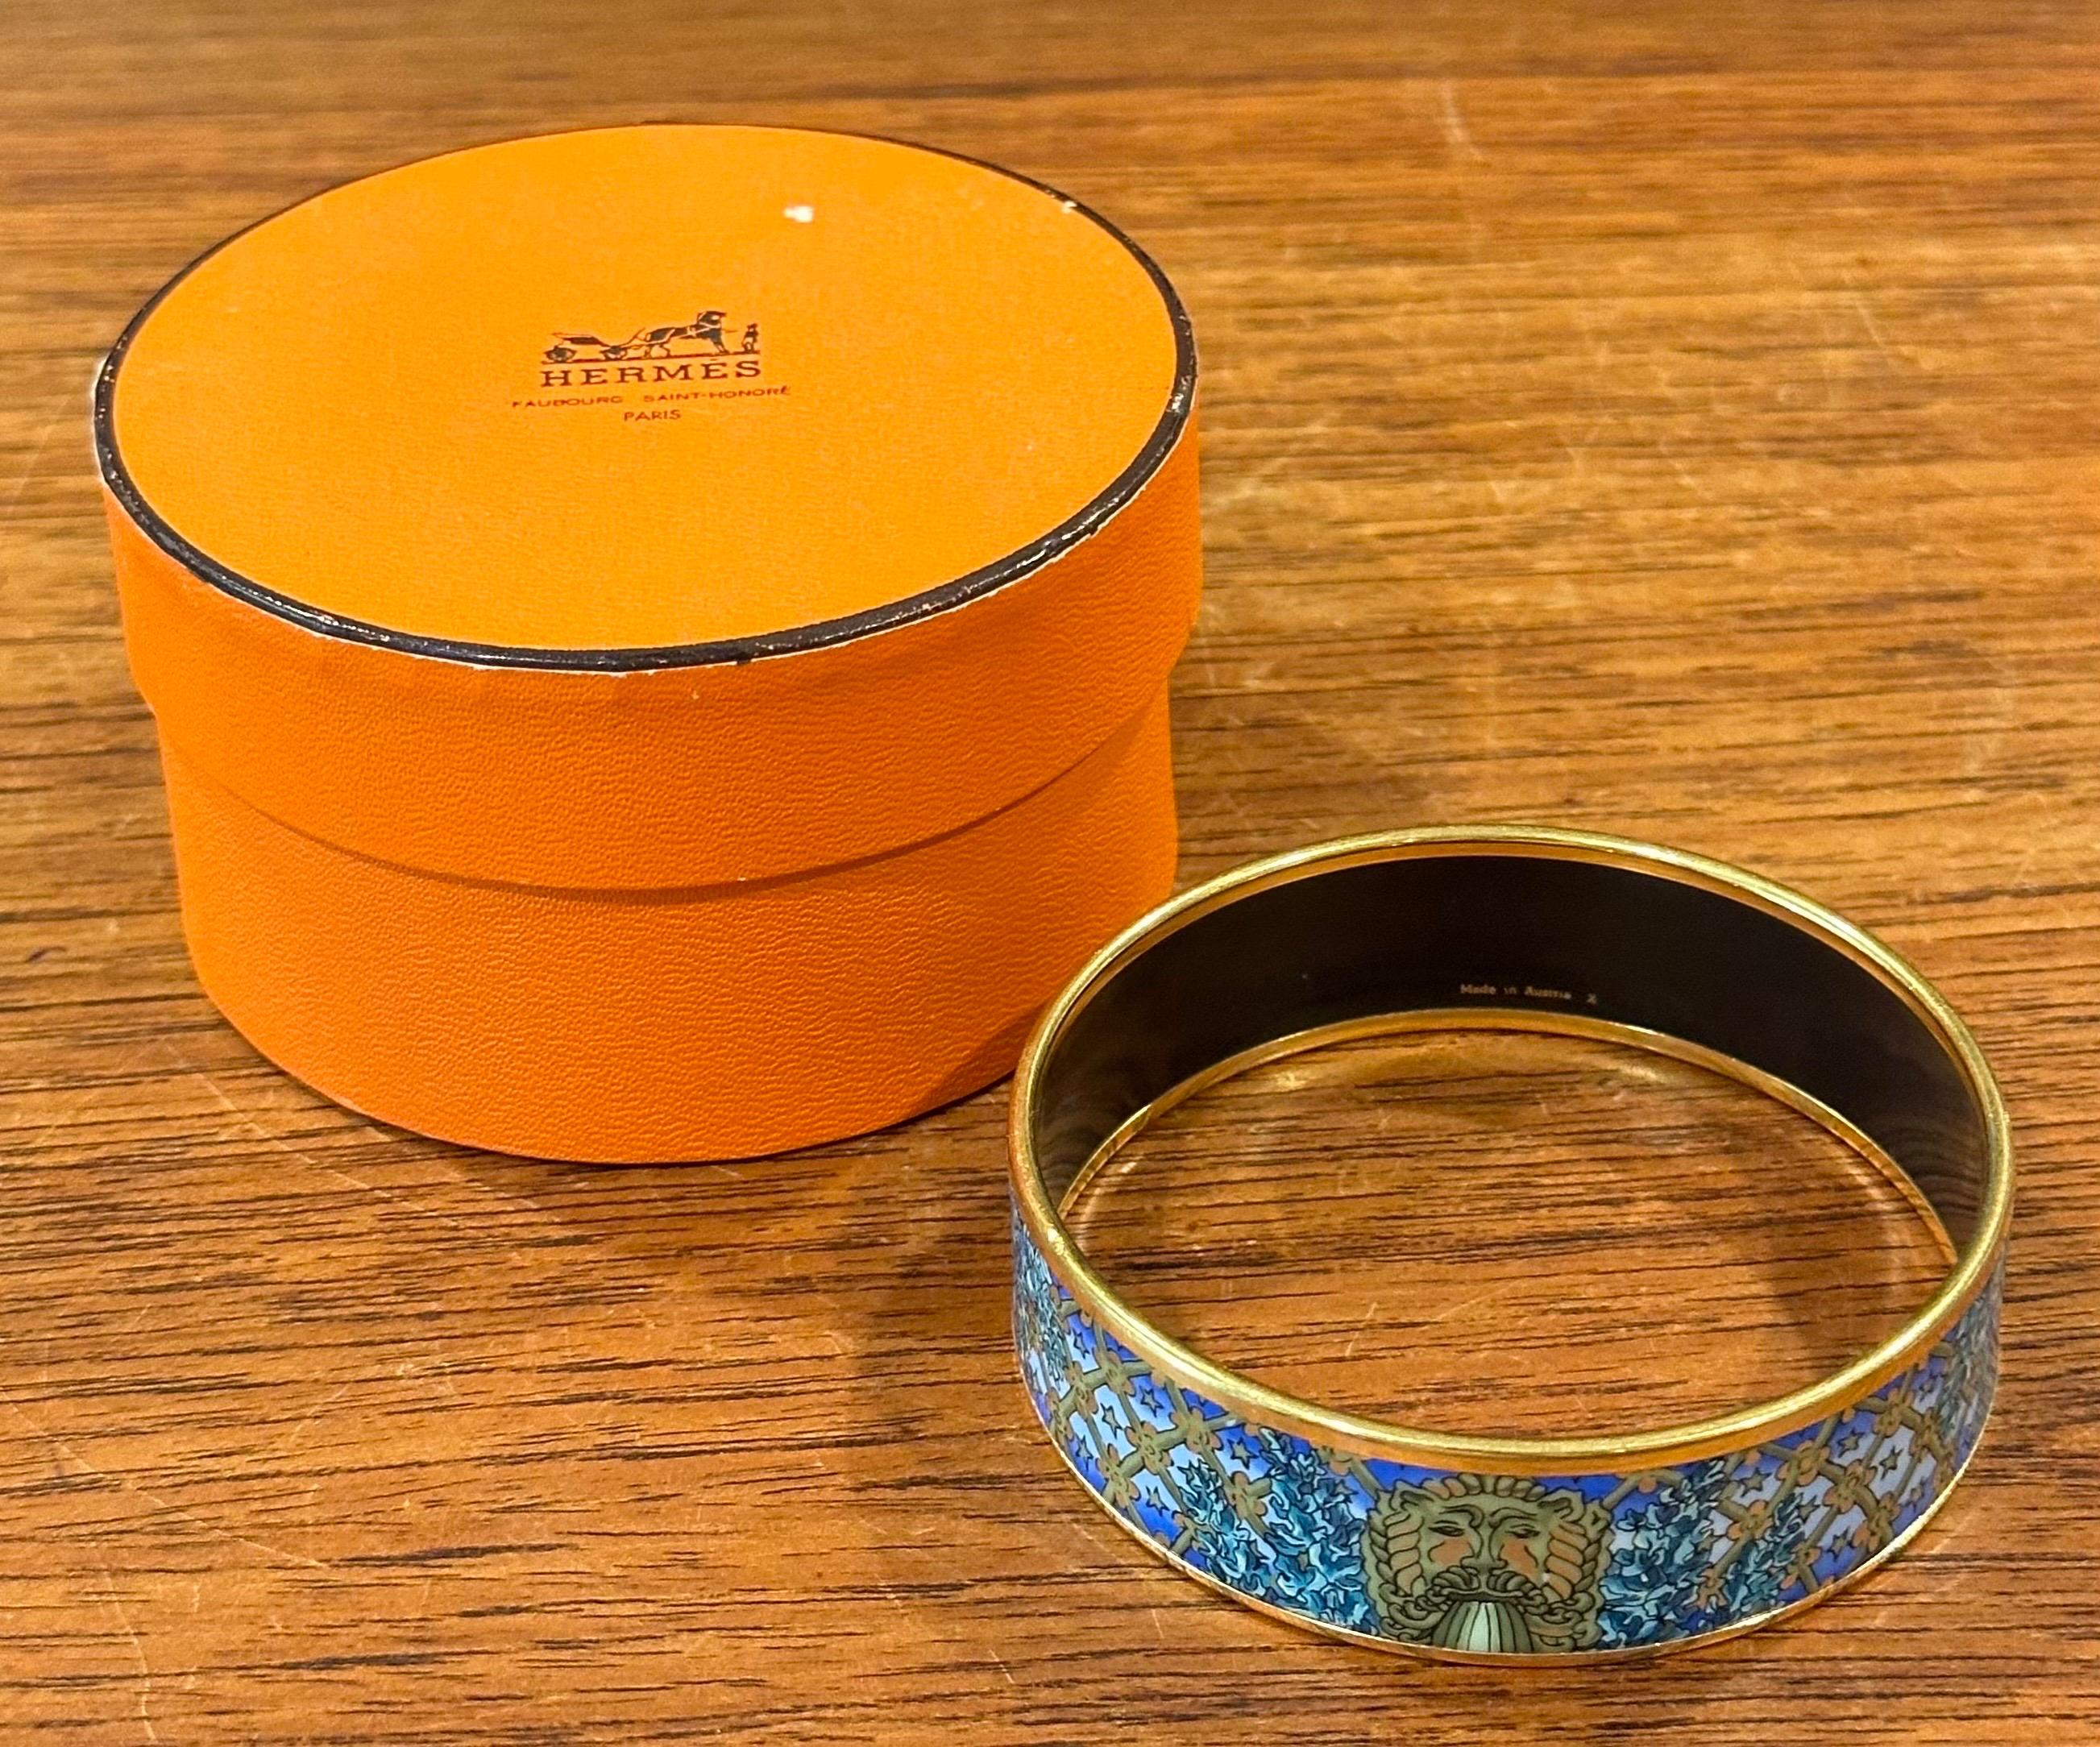 Vintage Enameled Lion Head Bangle Bracelet with Box by Hermès 70mm In Good Condition For Sale In San Diego, CA